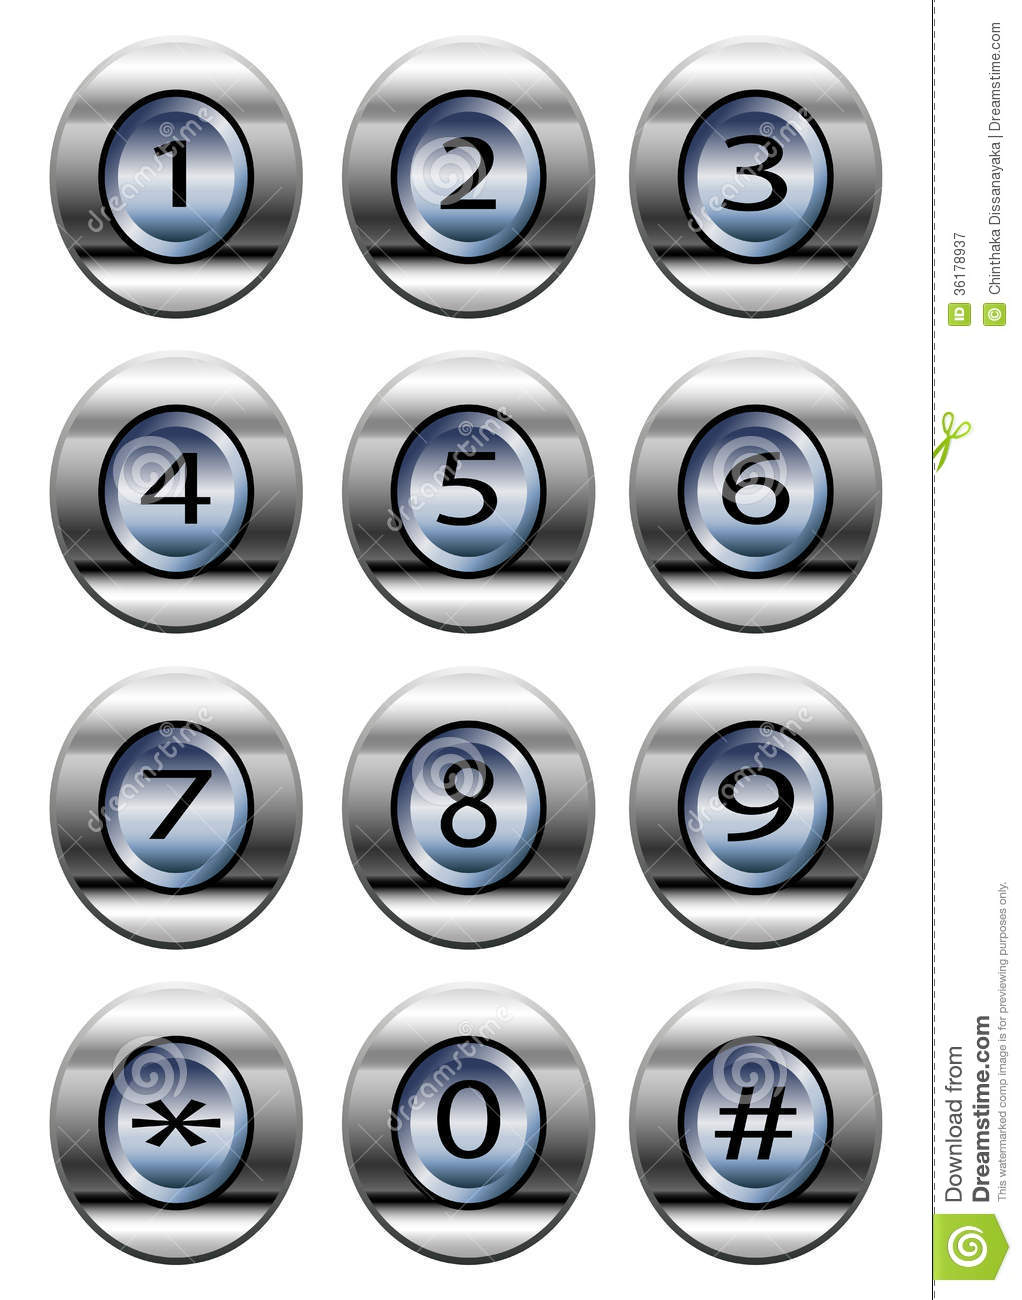 Phone Dial Pad Royalty Free Stock Photography   Image  36178937